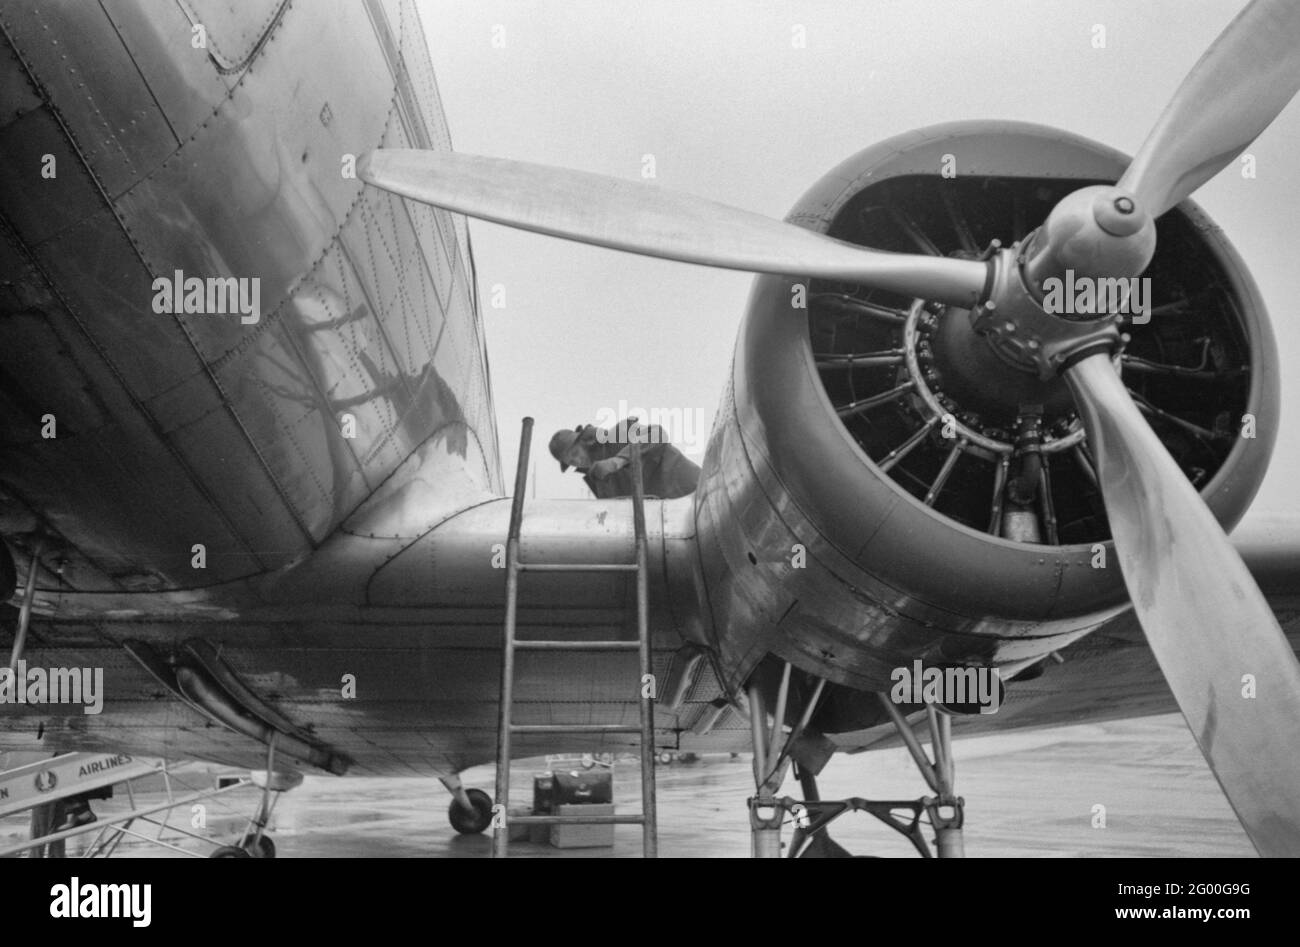 Checking the fuel on a plane at the municipal airport on a rainy day, Washington, DC, July 1941 Stock Photo